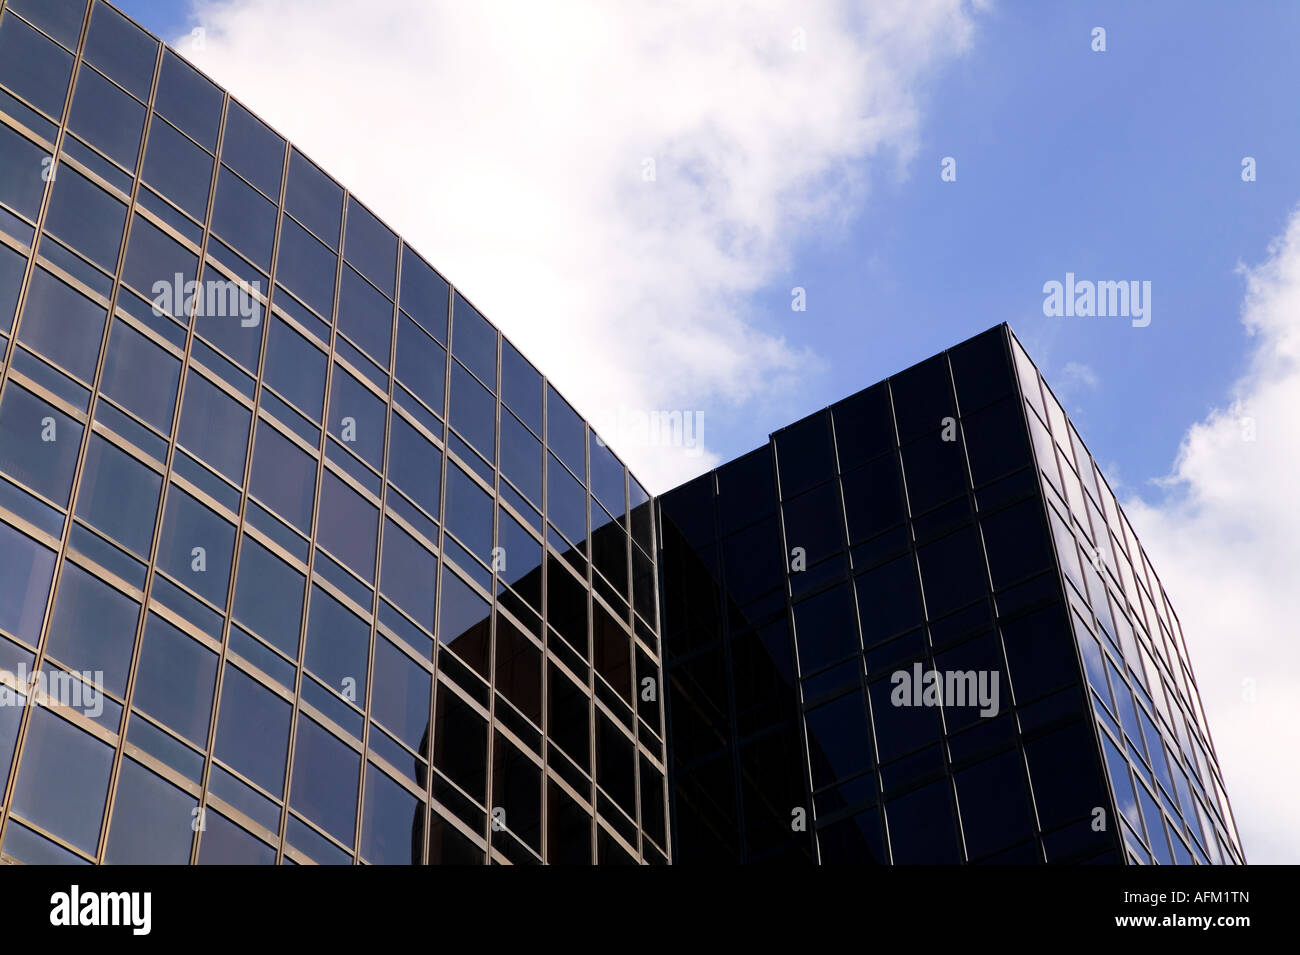 Modern smoked glass office building in shadow and light against a blue cloudy sky Stock Photo